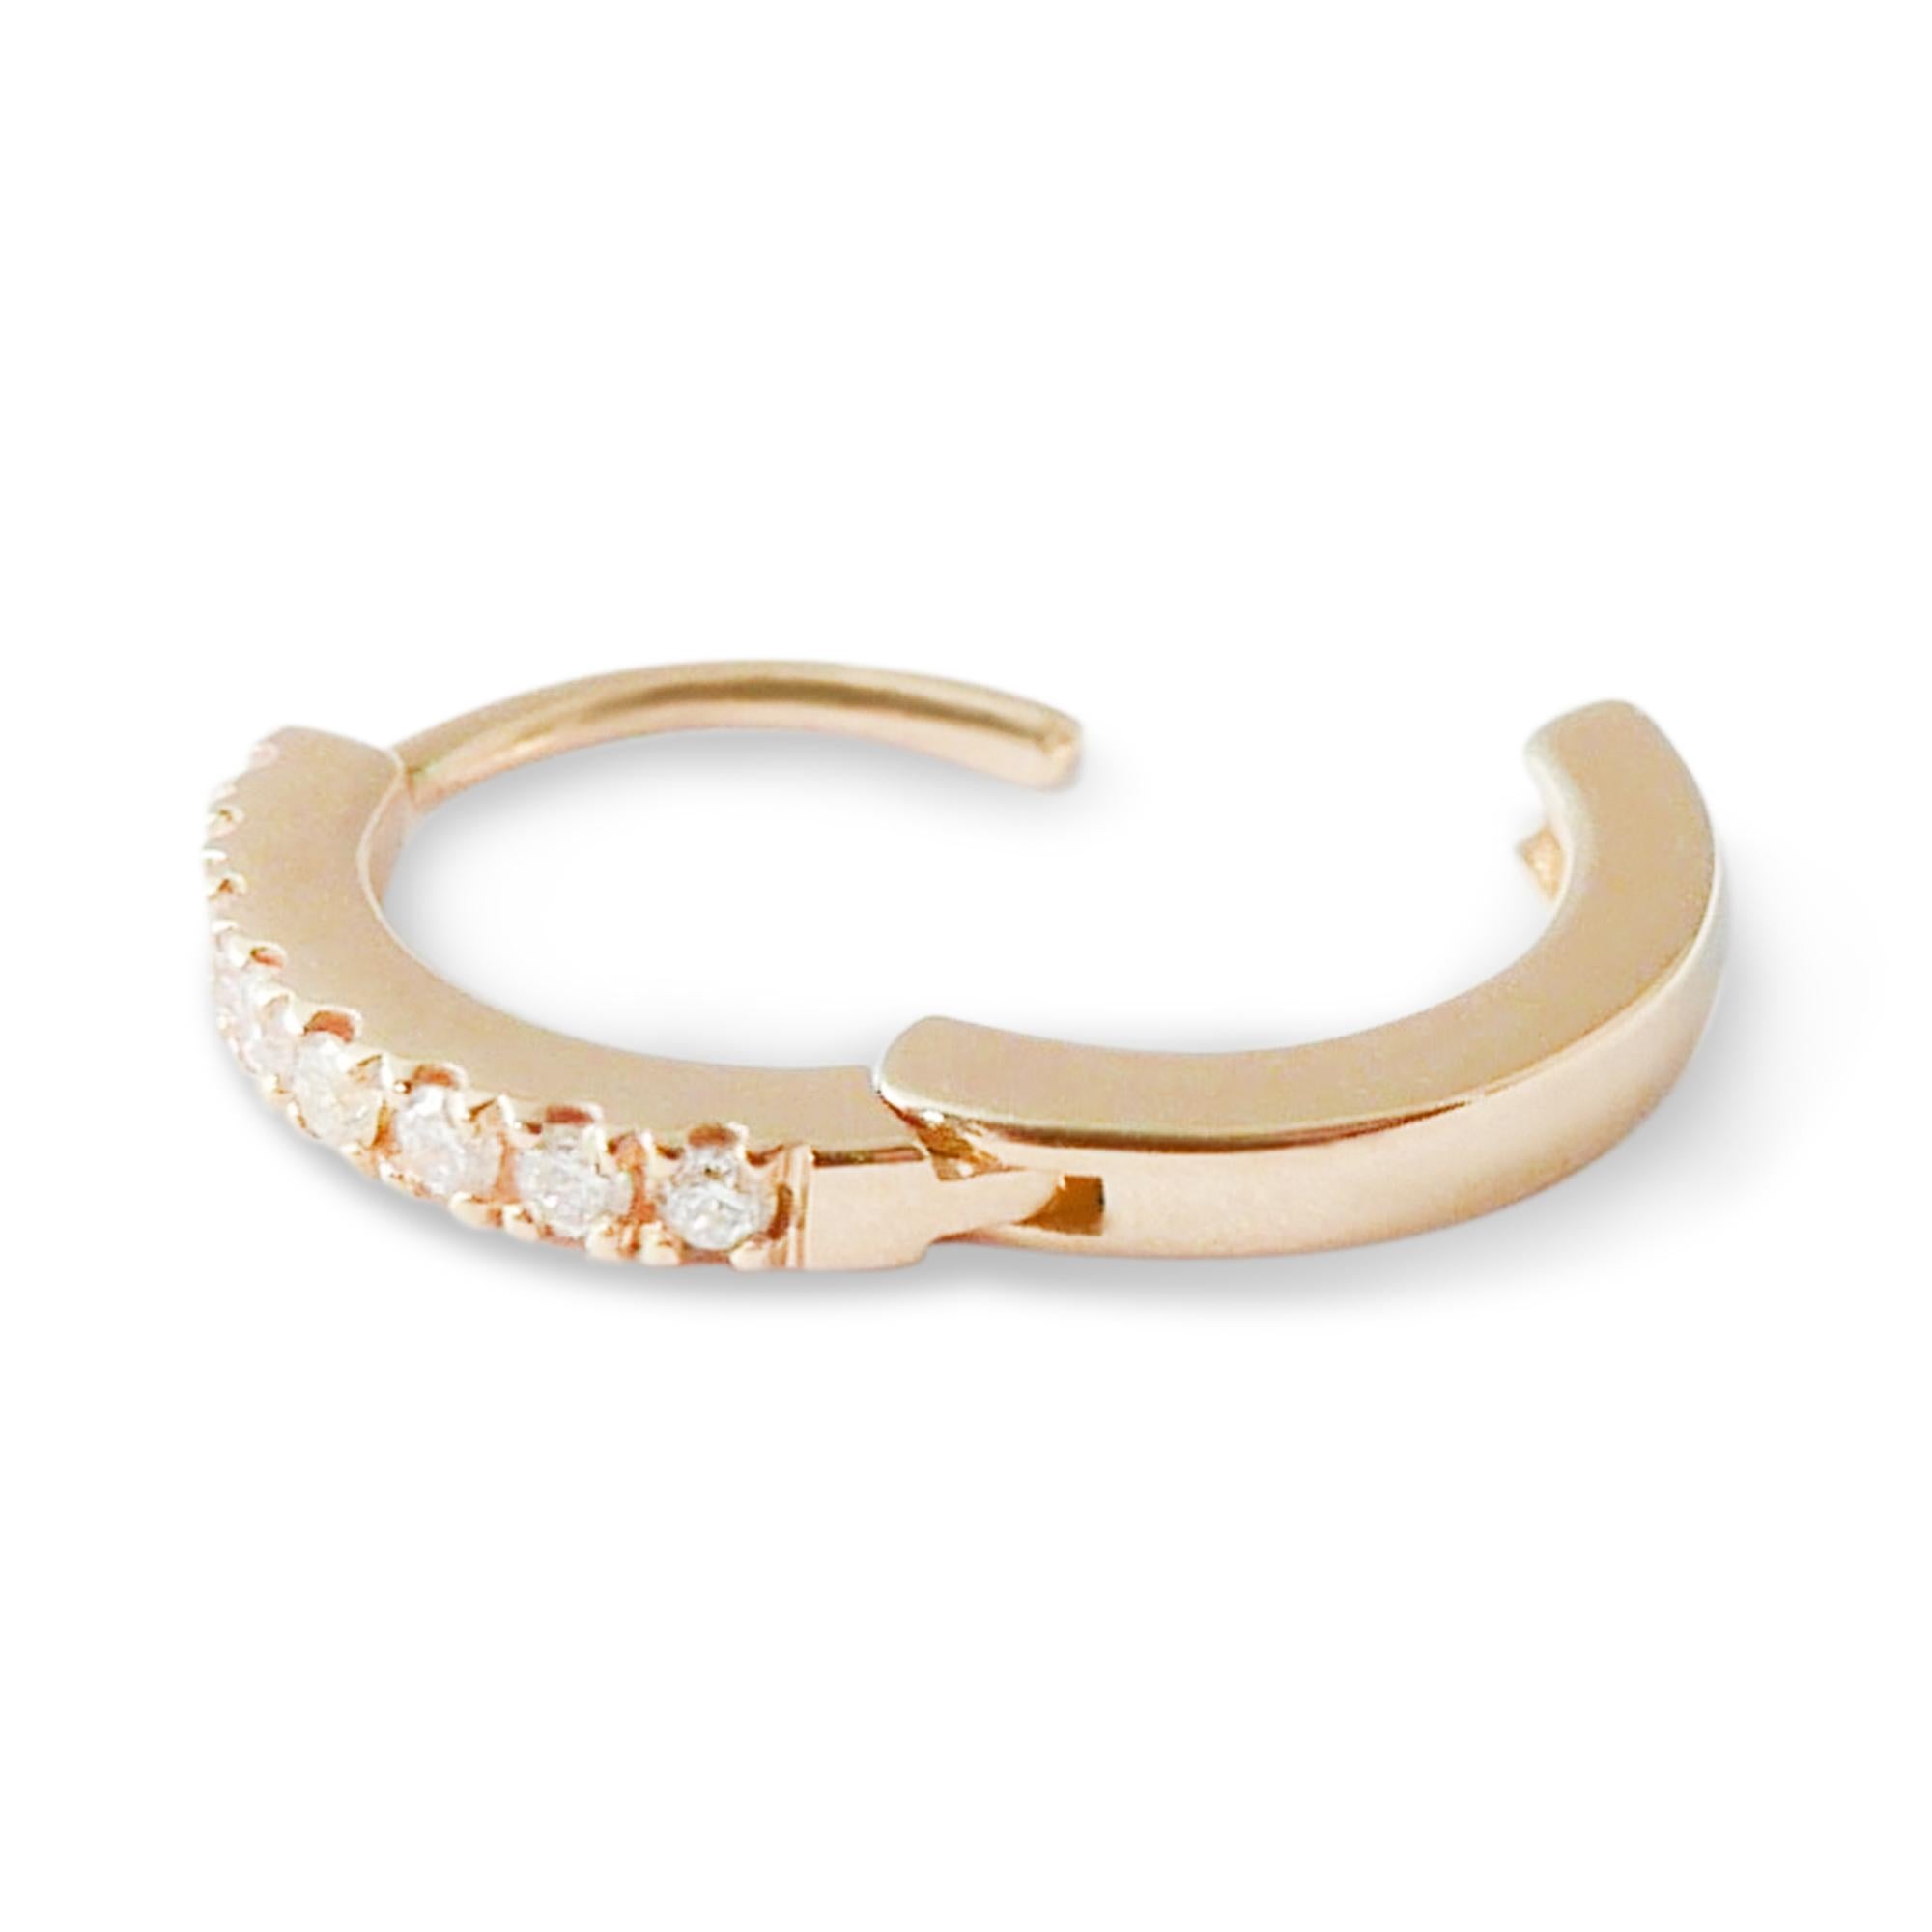 This pair of delicate huggie hoop earrings is crafted in 18-karat rose gold and set with 0.08 carats of white pave diamonds.  The earrings feature a classic 18-karat yellow gold pave setting and a click post fastening for a secure and close fit. 